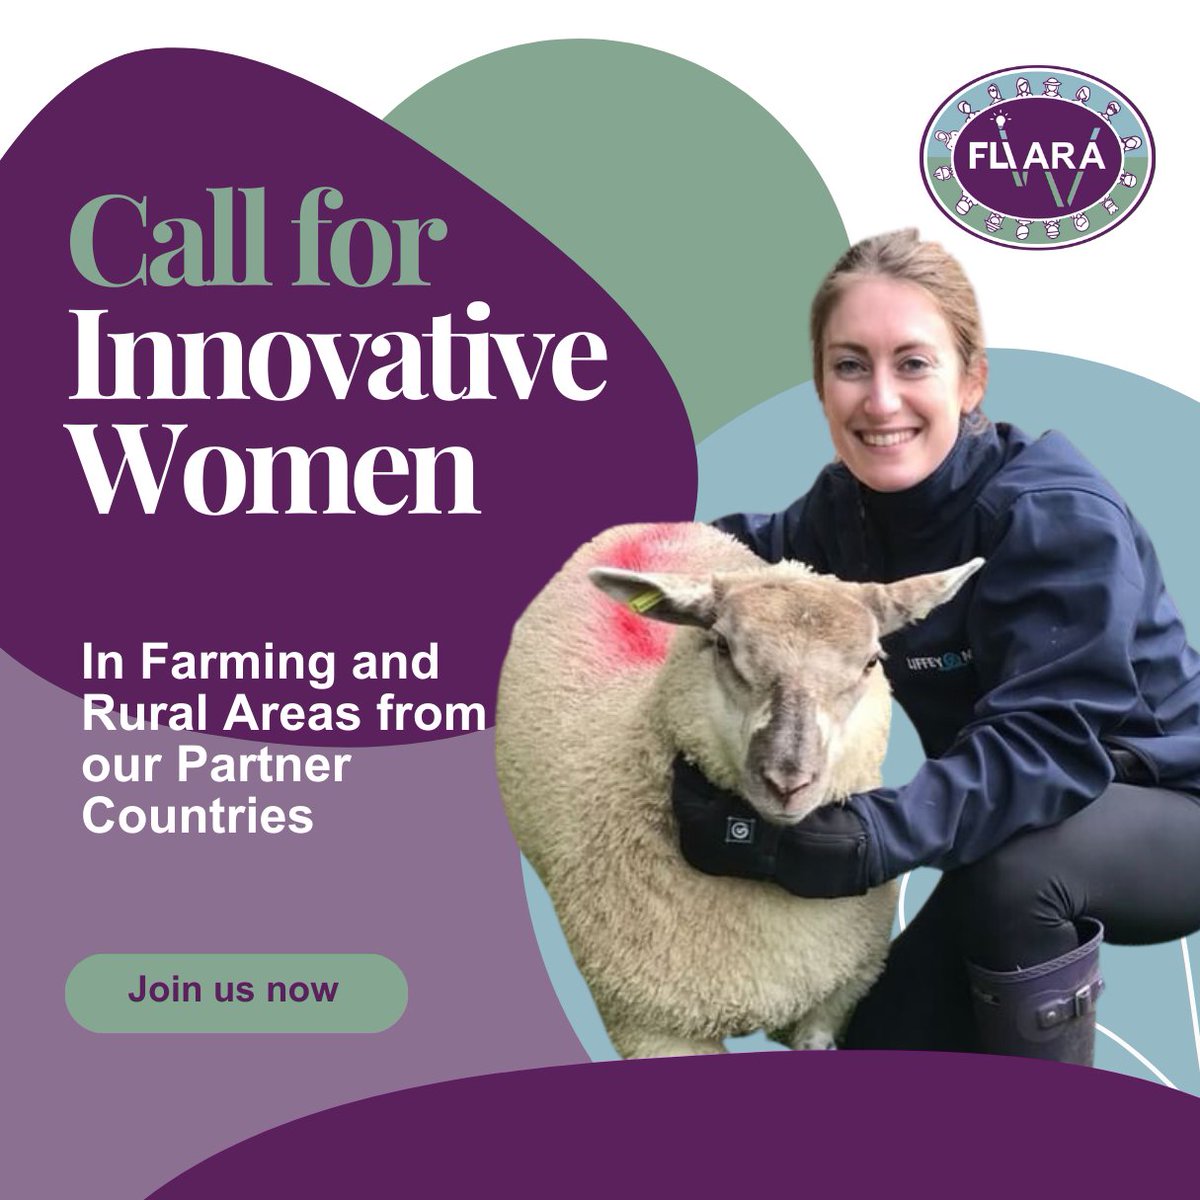 🌾 Calling All Innovative #WomenInAgriculture and Rural Areas!

🟣If you're a rural woman driving change in #Agriculture or #RuralAreas, we would like to hear from YOU!

🌟 Ready to make a difference? Click now: fliara.eu/call-for-innov…